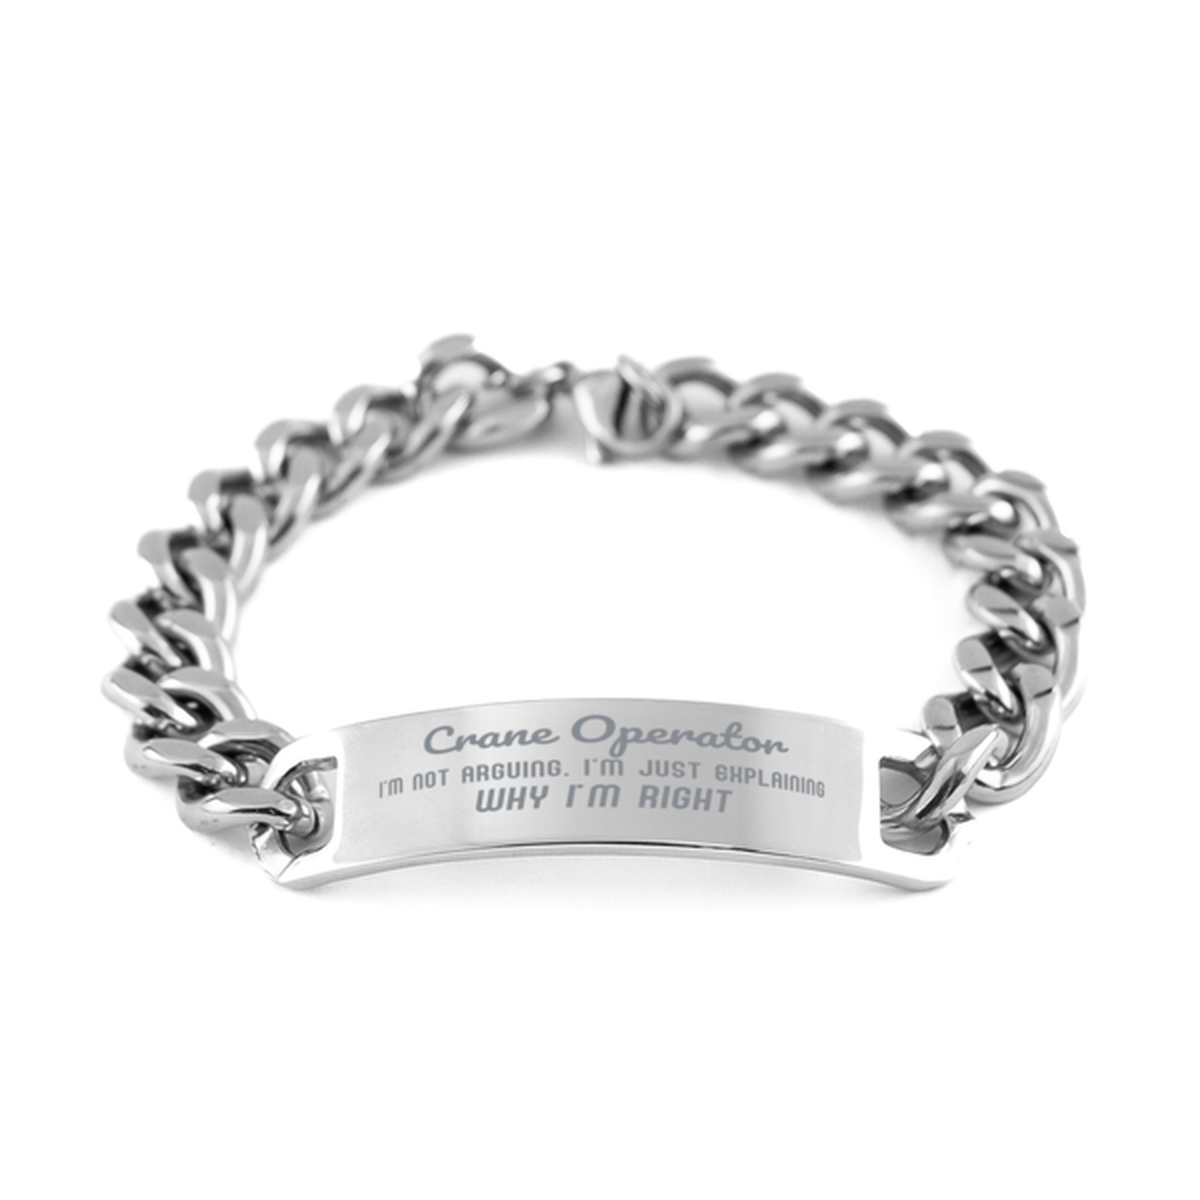 Crane Operator I'm not Arguing. I'm Just Explaining Why I'm RIGHT Cuban Chain Stainless Steel Bracelet, Graduation Birthday Christmas Crane Operator Gifts For Crane Operator Funny Saying Quote Present for Men Women Coworker